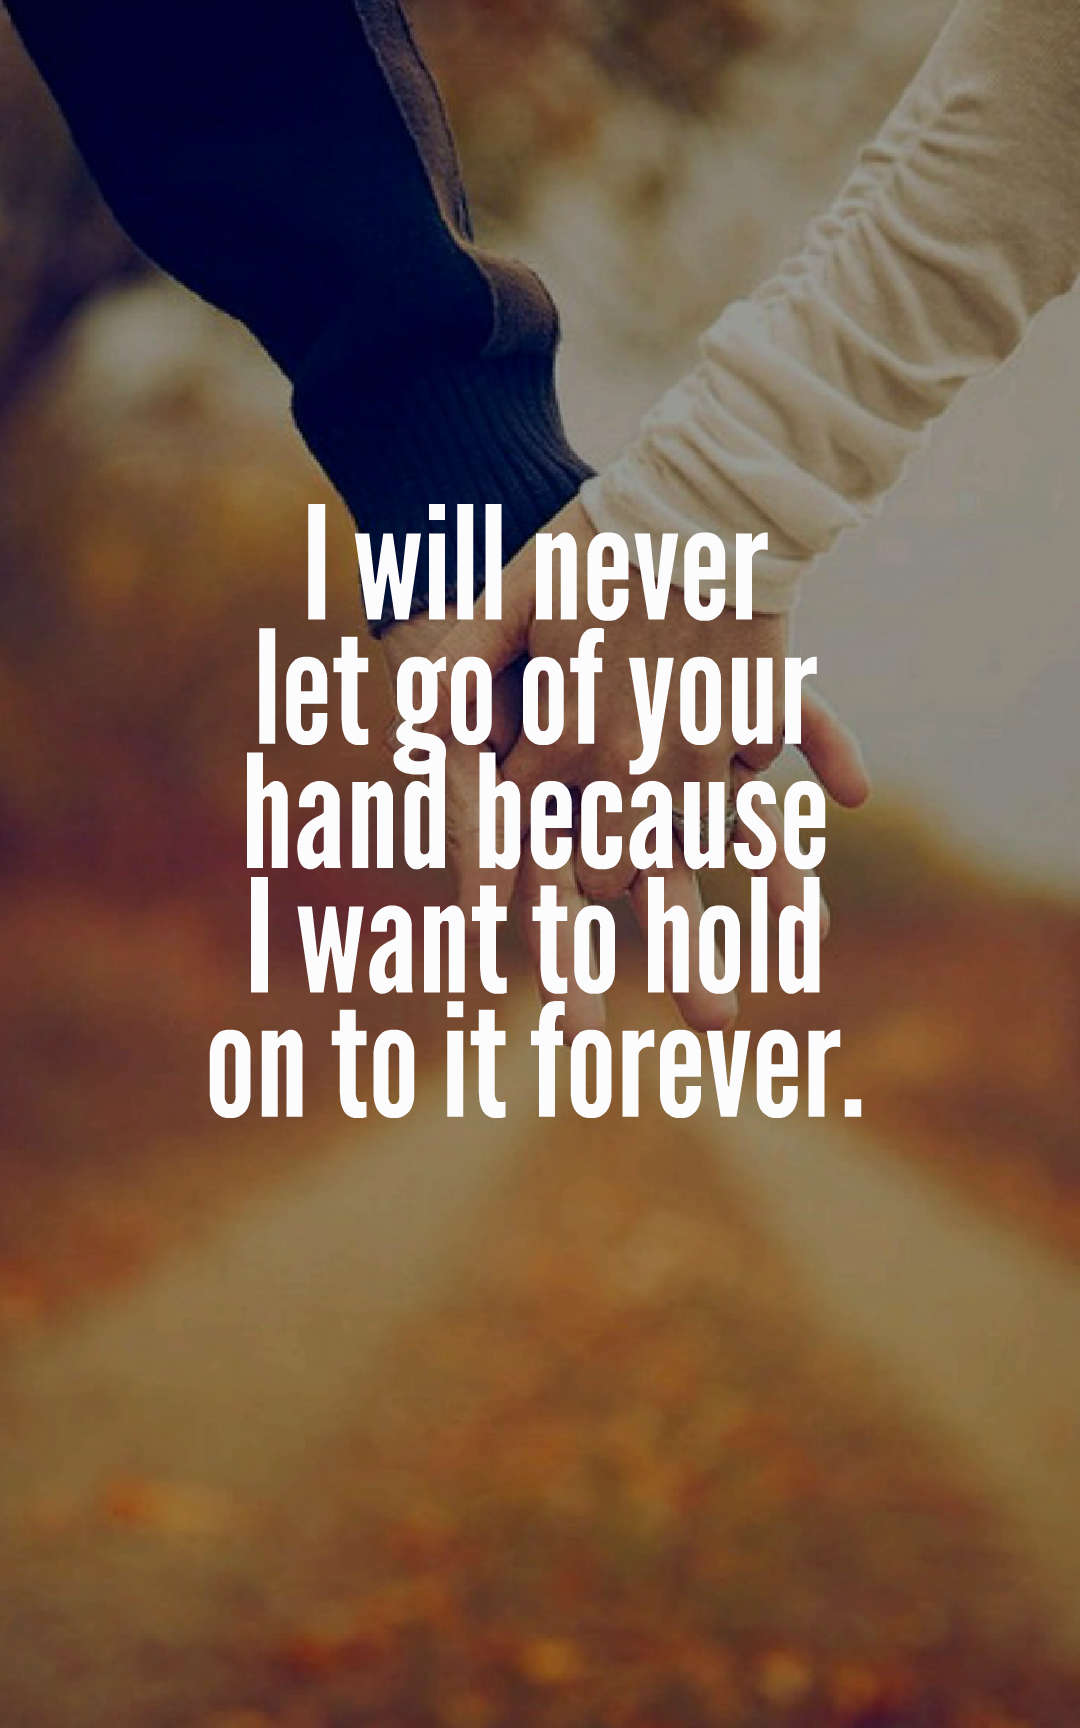 I will never let go of your hand because I want to hold on to it forever.